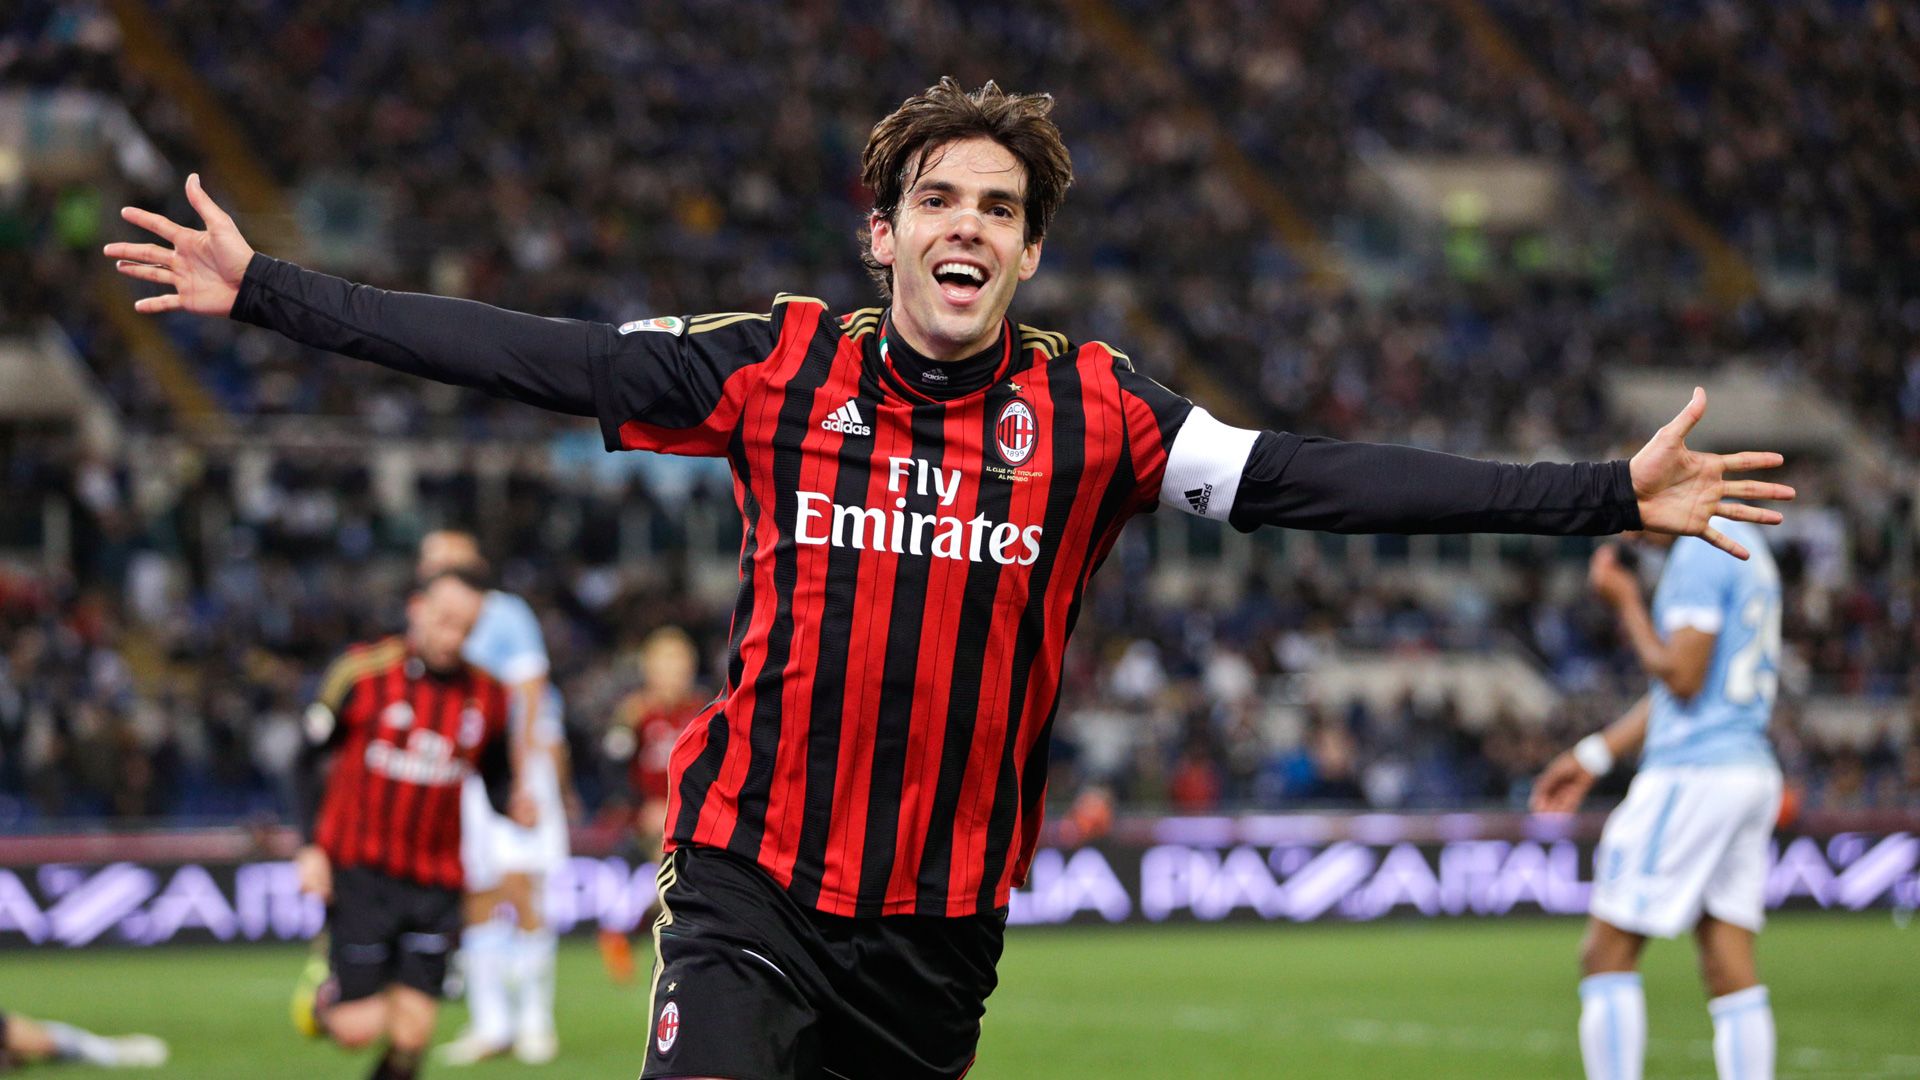 Kaka to play for MLS side Orlando City SC in 2015